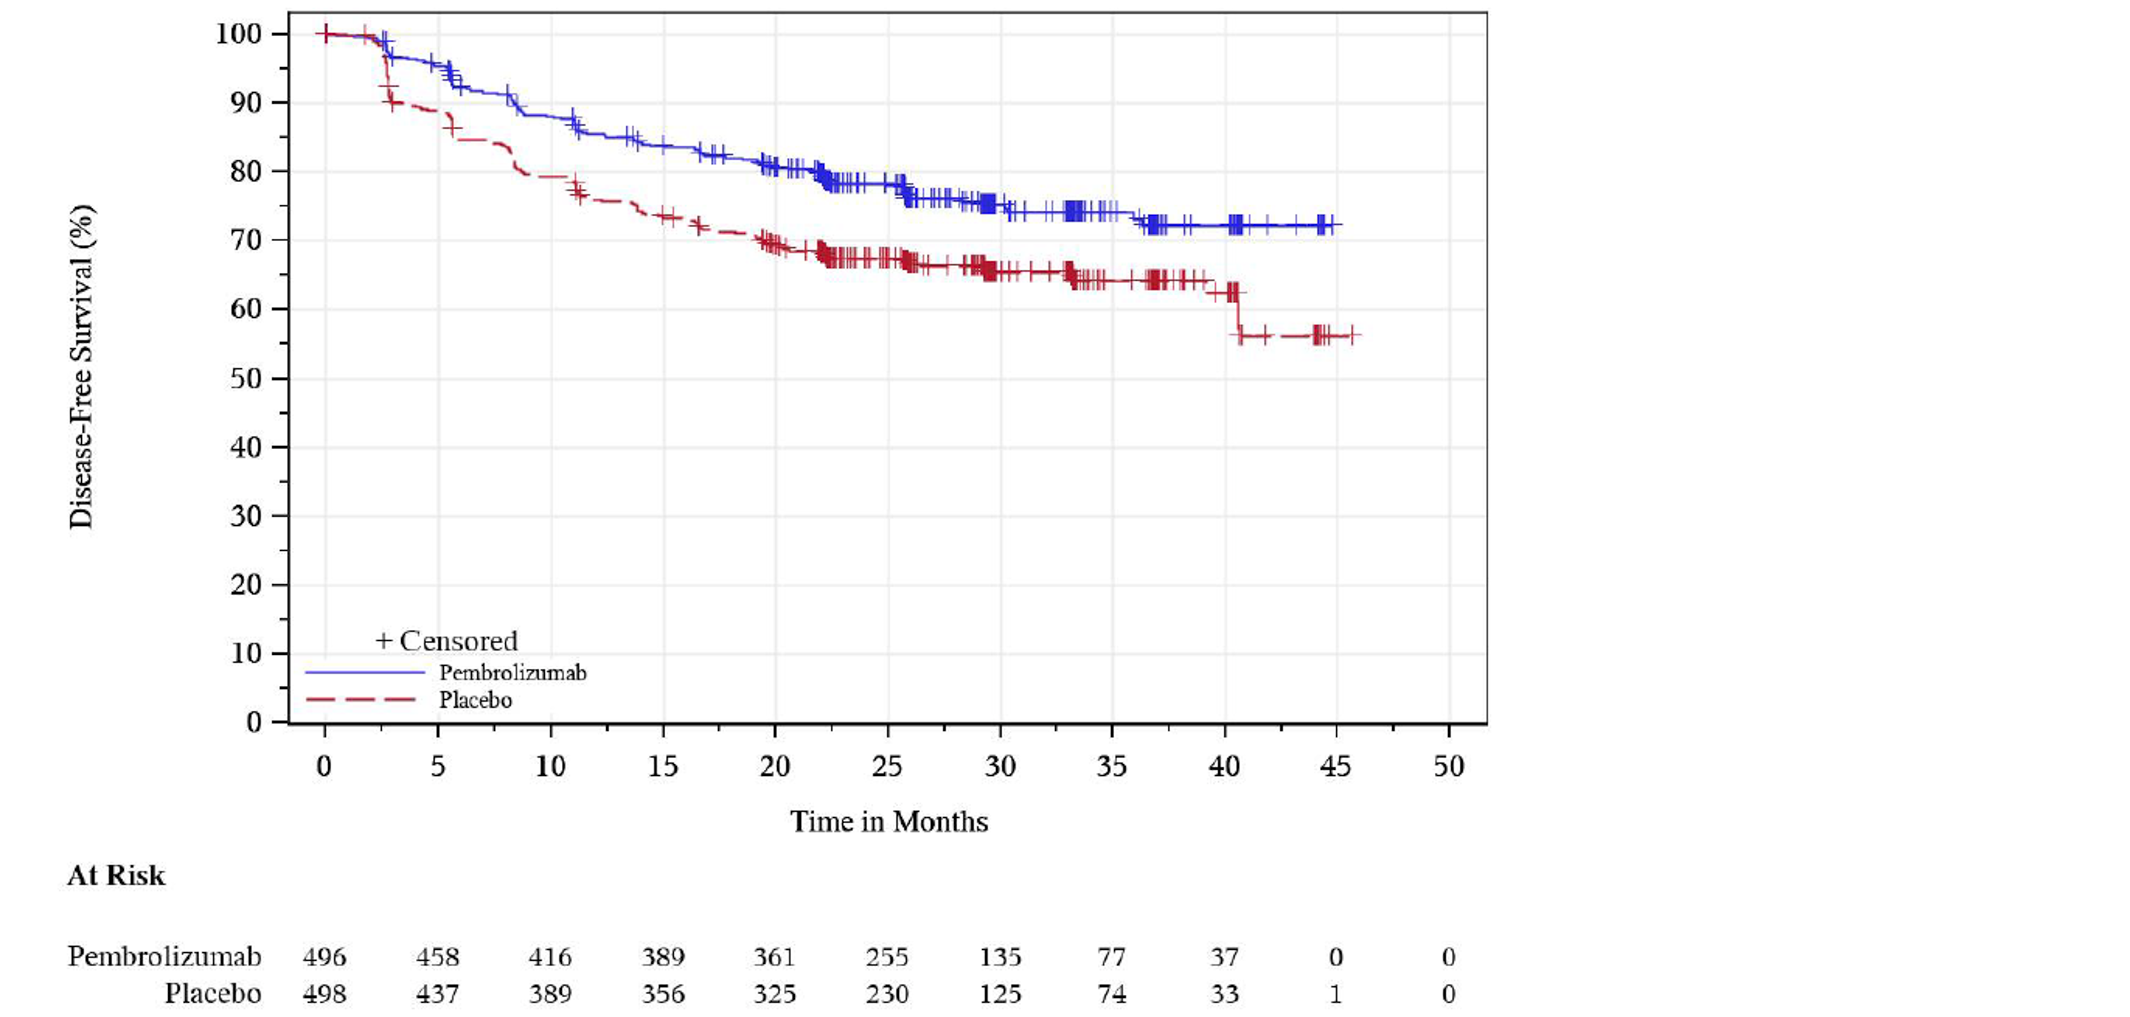 Kaplan-Meier analysis of disease-free survival for patients enrolled in the KEYNOTE-564 trial showing the number of at-risk patients treated receiving pembrolizumab at 0, 5, 10, 15, 20, 25, 30, 35, 40, 45, and 50 months was 496, 458, 416, 389, 361, 255, 135, 77, 37, 0, and 0, respectively. The number of at-risk patients receiving placebo at 0, 5, 10, 15, 20, 25, 30, 35, 40, 45 and 50 months was 498, 437, 389, 356, 325, 230, 125, 74, 33, 1, and 0, respectively.